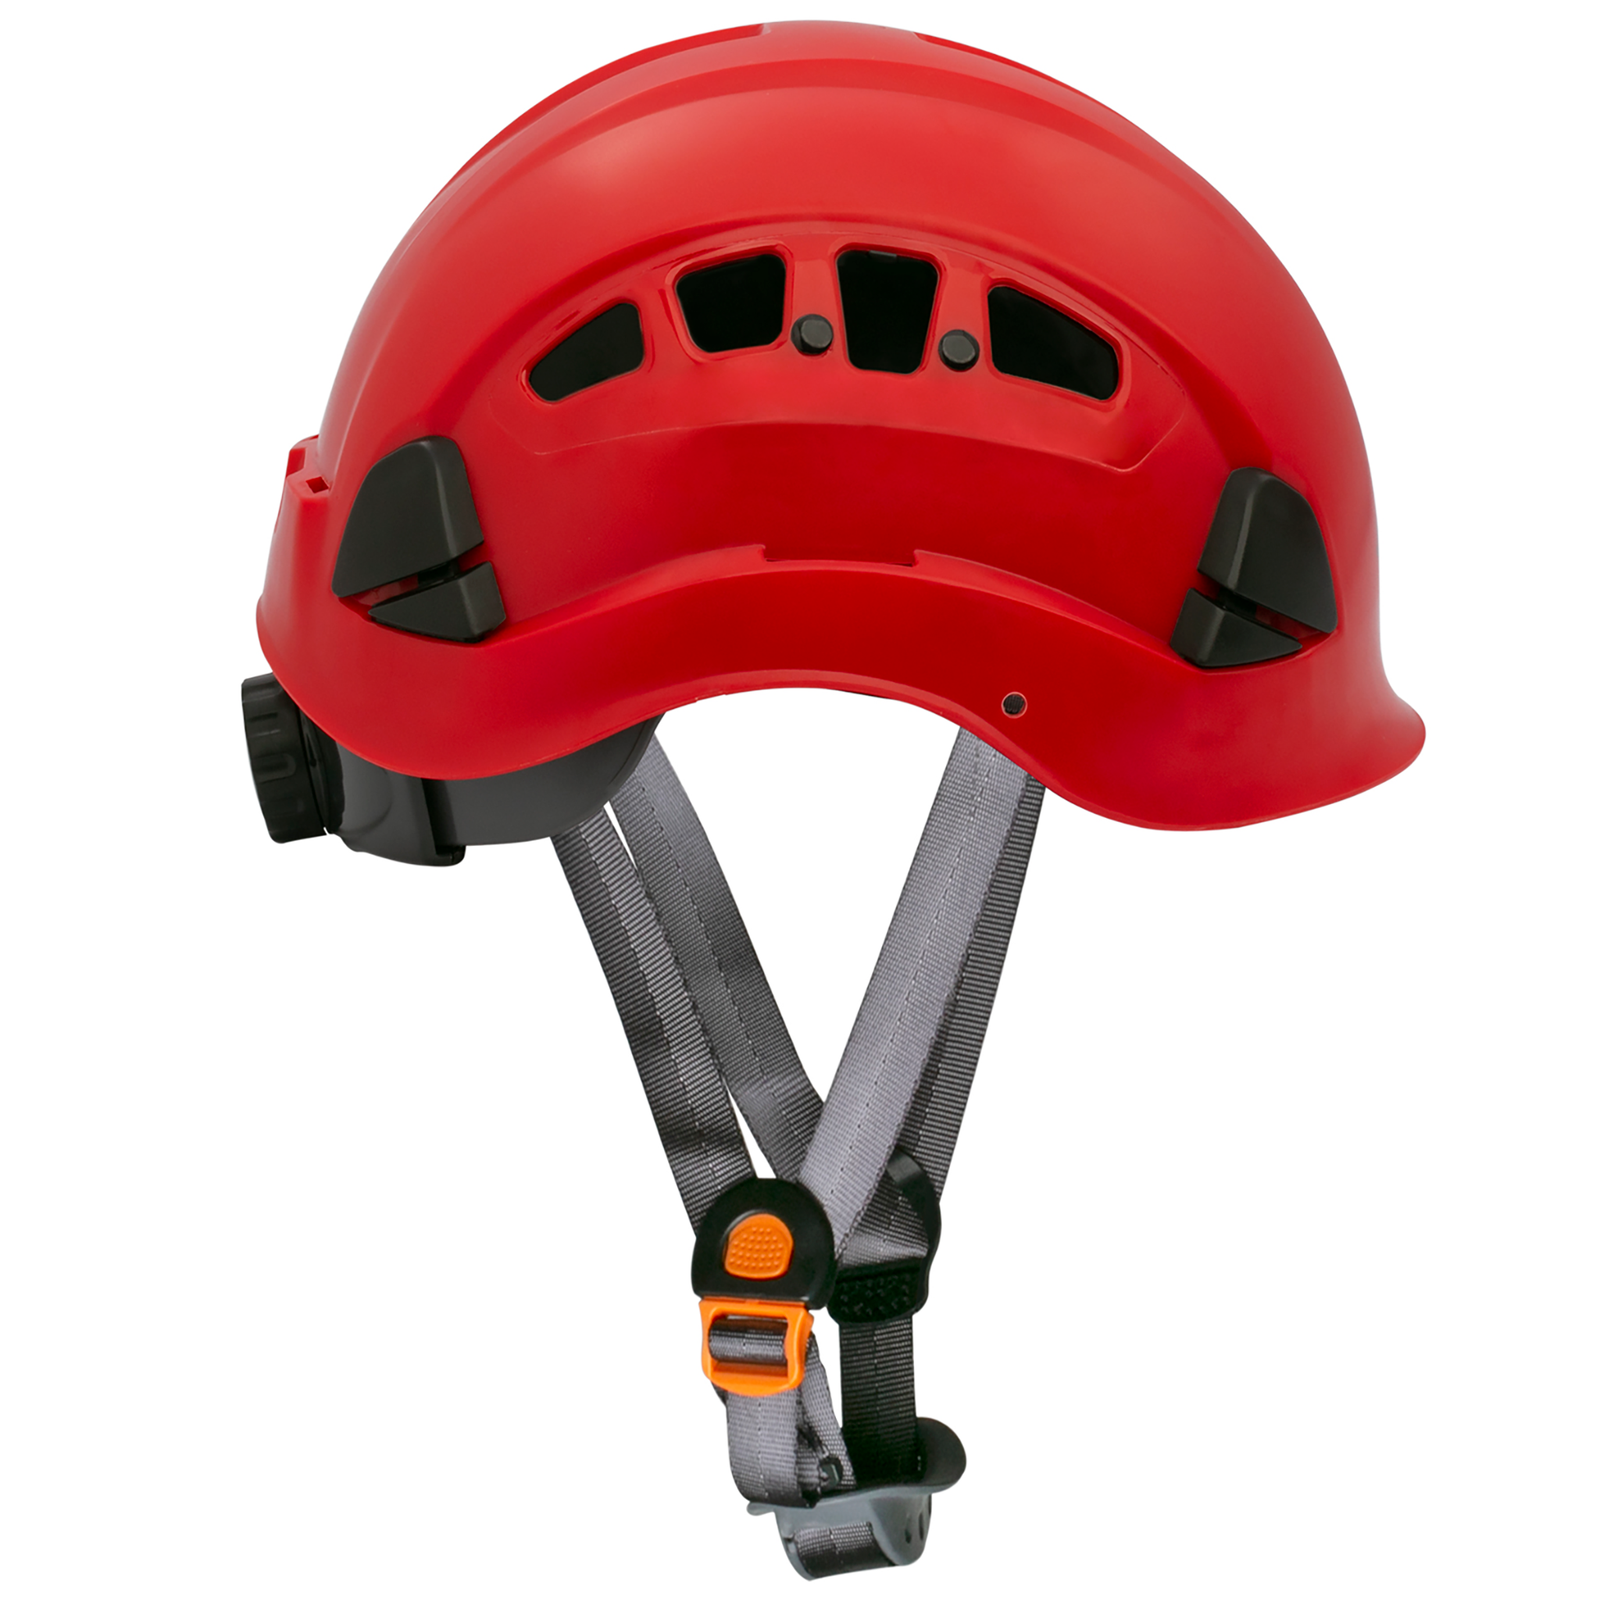 Side view of the Jorestech red ventilated rescue hard hat Type 1 Class Cwith adjustable 6 point suspension and black chin strap